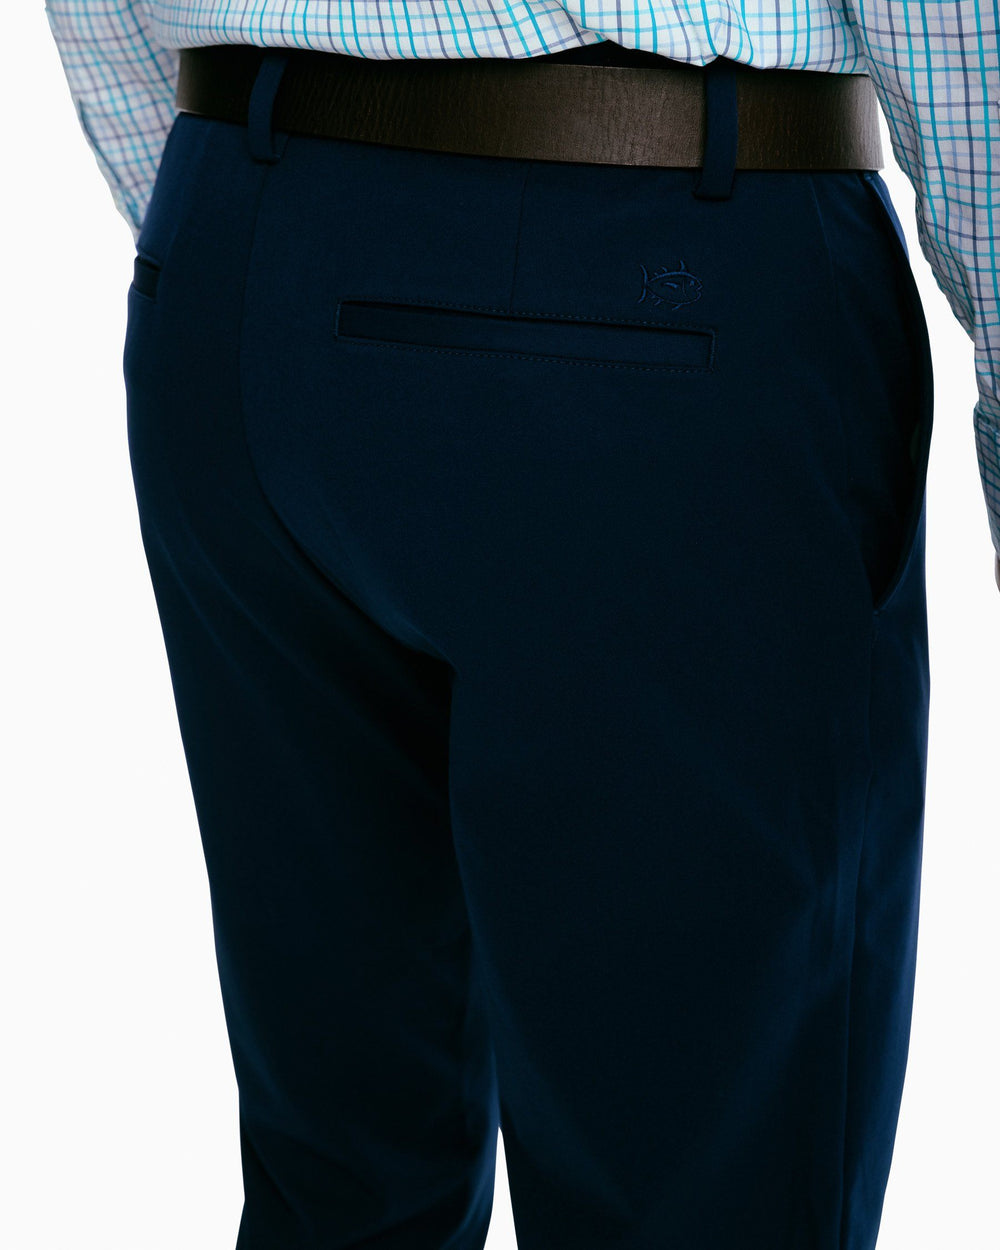 The pocket view of the Men's Jack Performance Pant by Southern Tide - True Navy